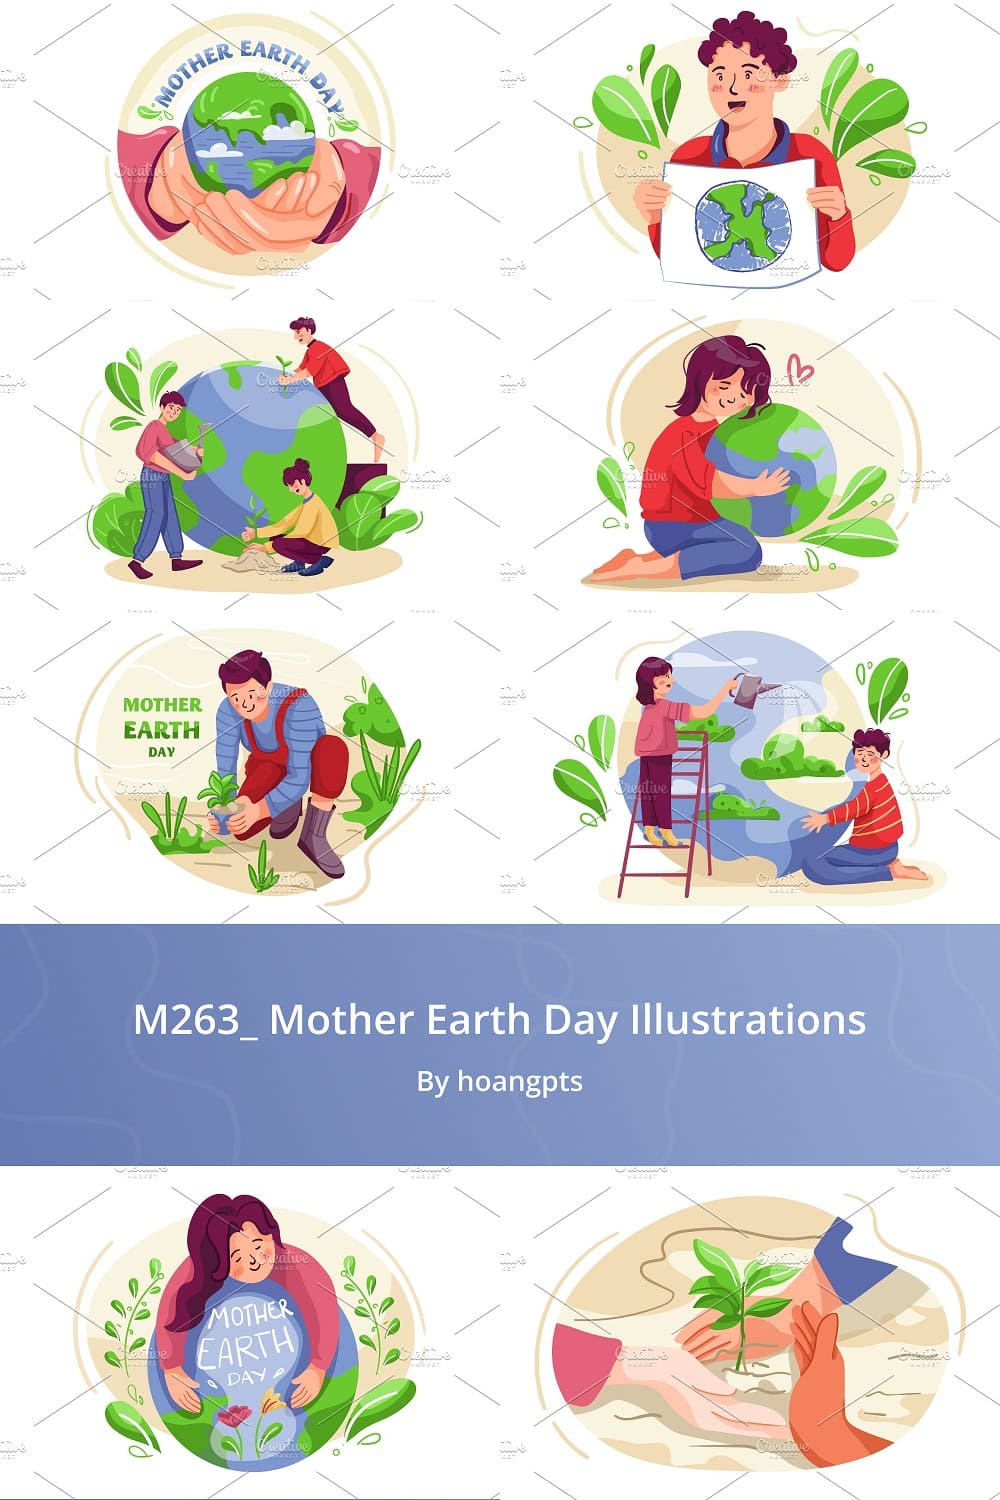 Illustrations depicting the Earth, people, and plants living in harmony.